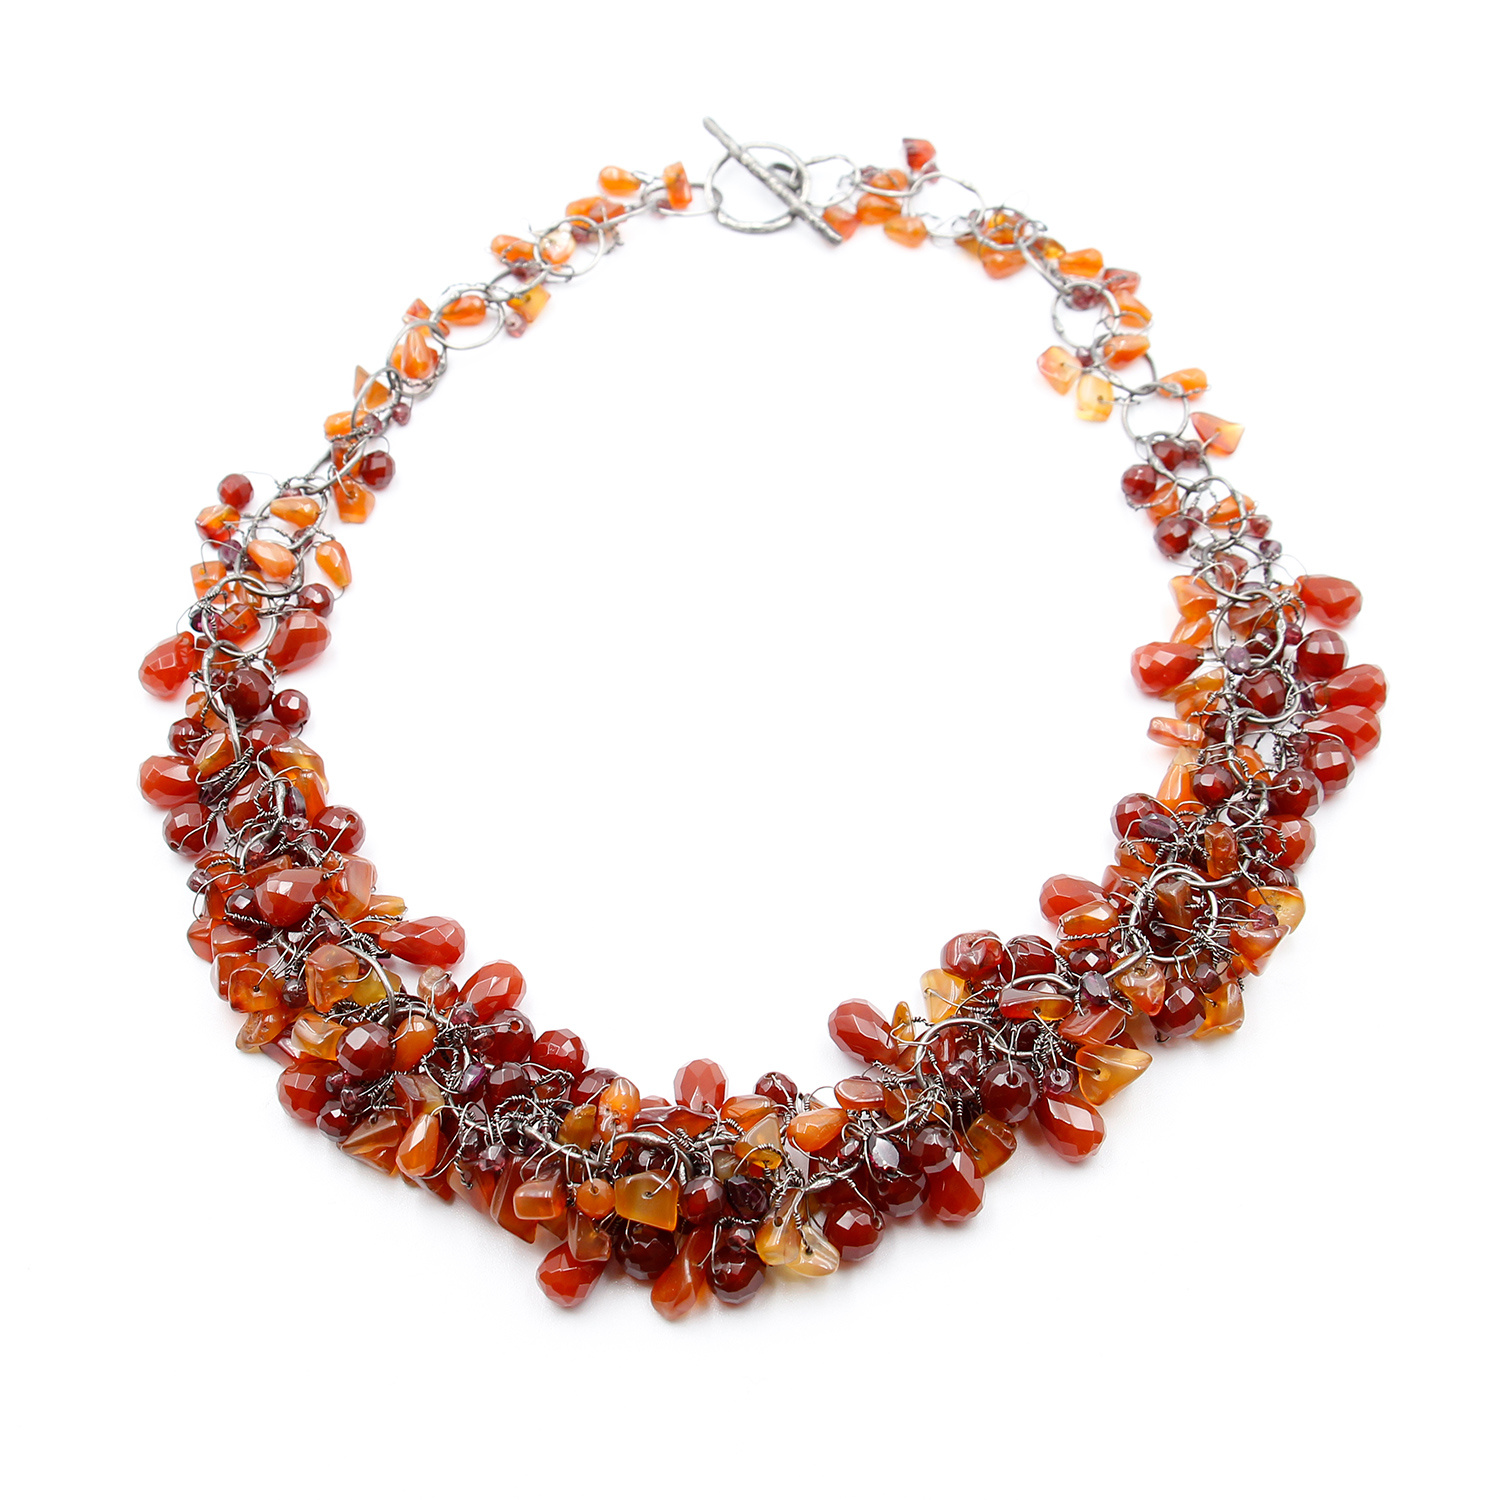 Necklace by Disa Allsopp